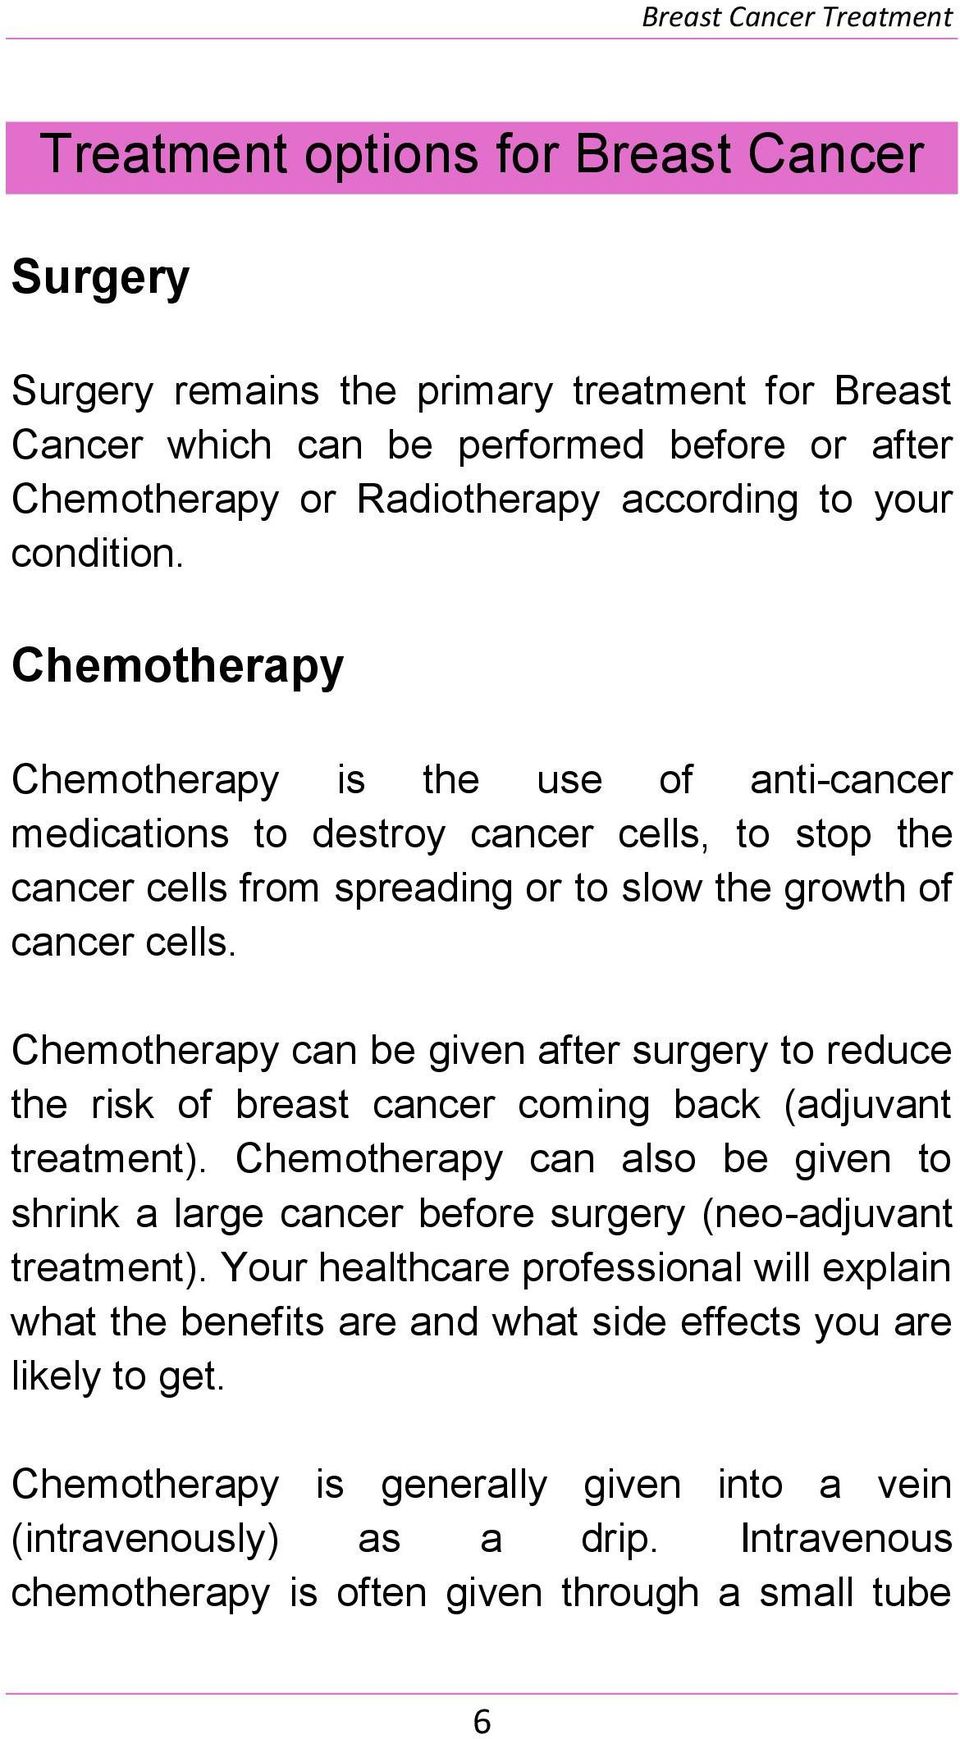 Chemotherapy can be given after surgery to reduce the risk of breast cancer coming back (adjuvant treatment).